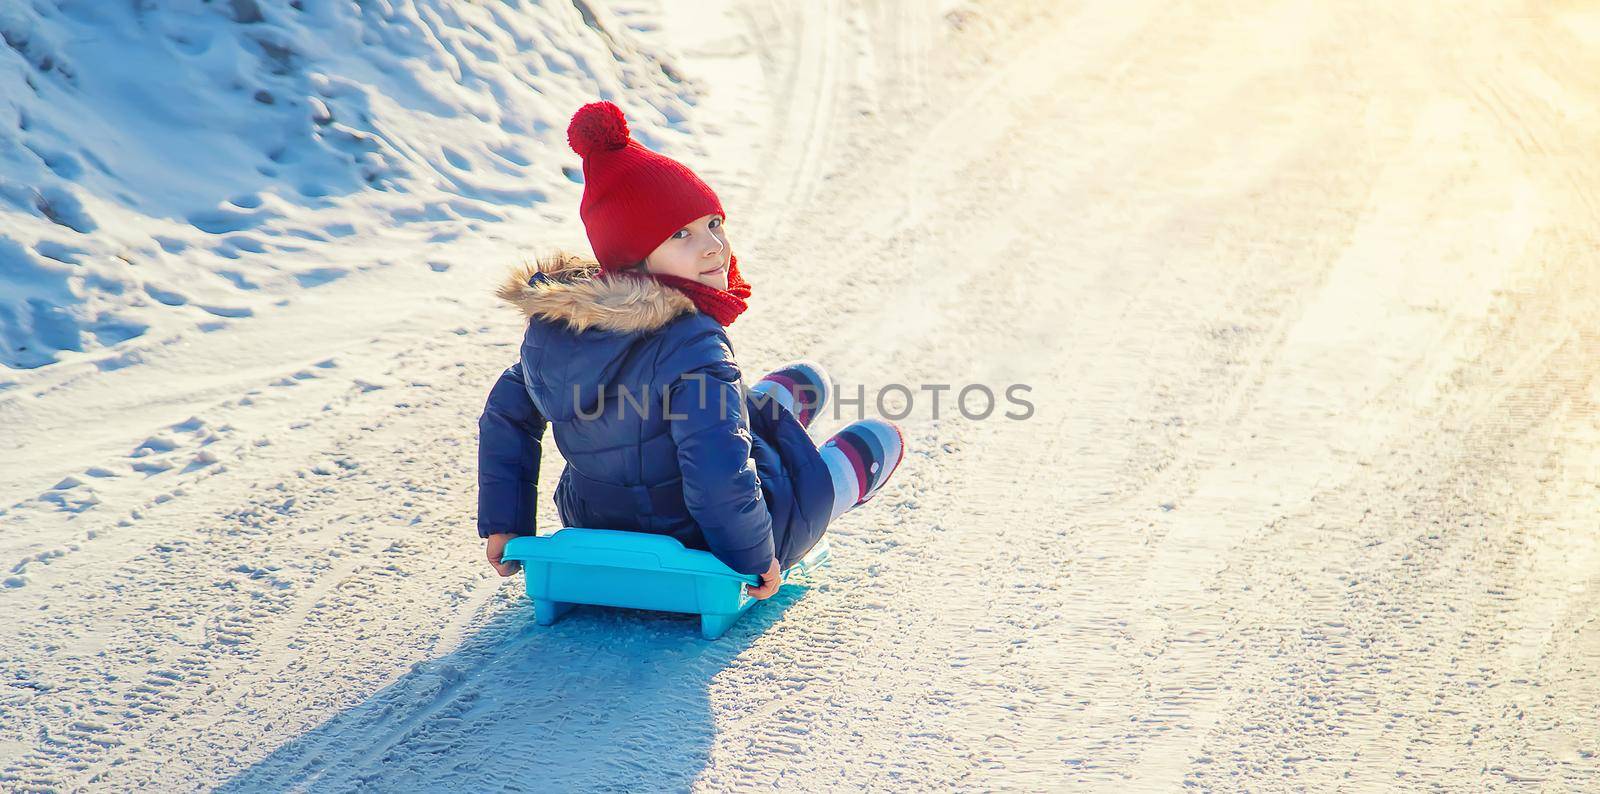 A child girl slides down a hill in the snow. Selective focus. People.